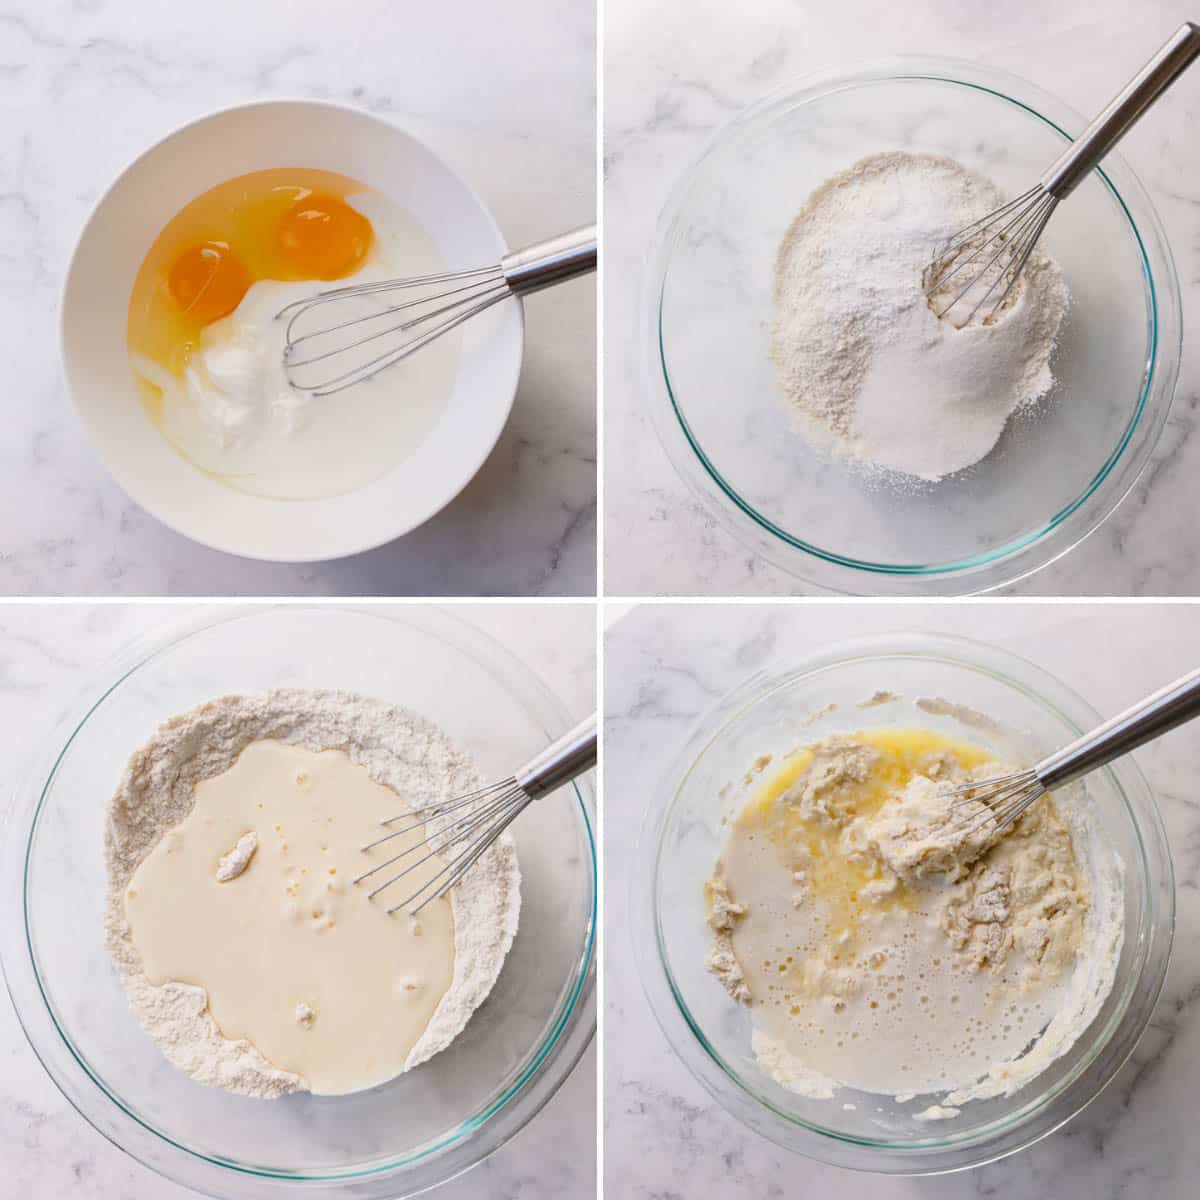 Step by step photos of how to make waffle batter.